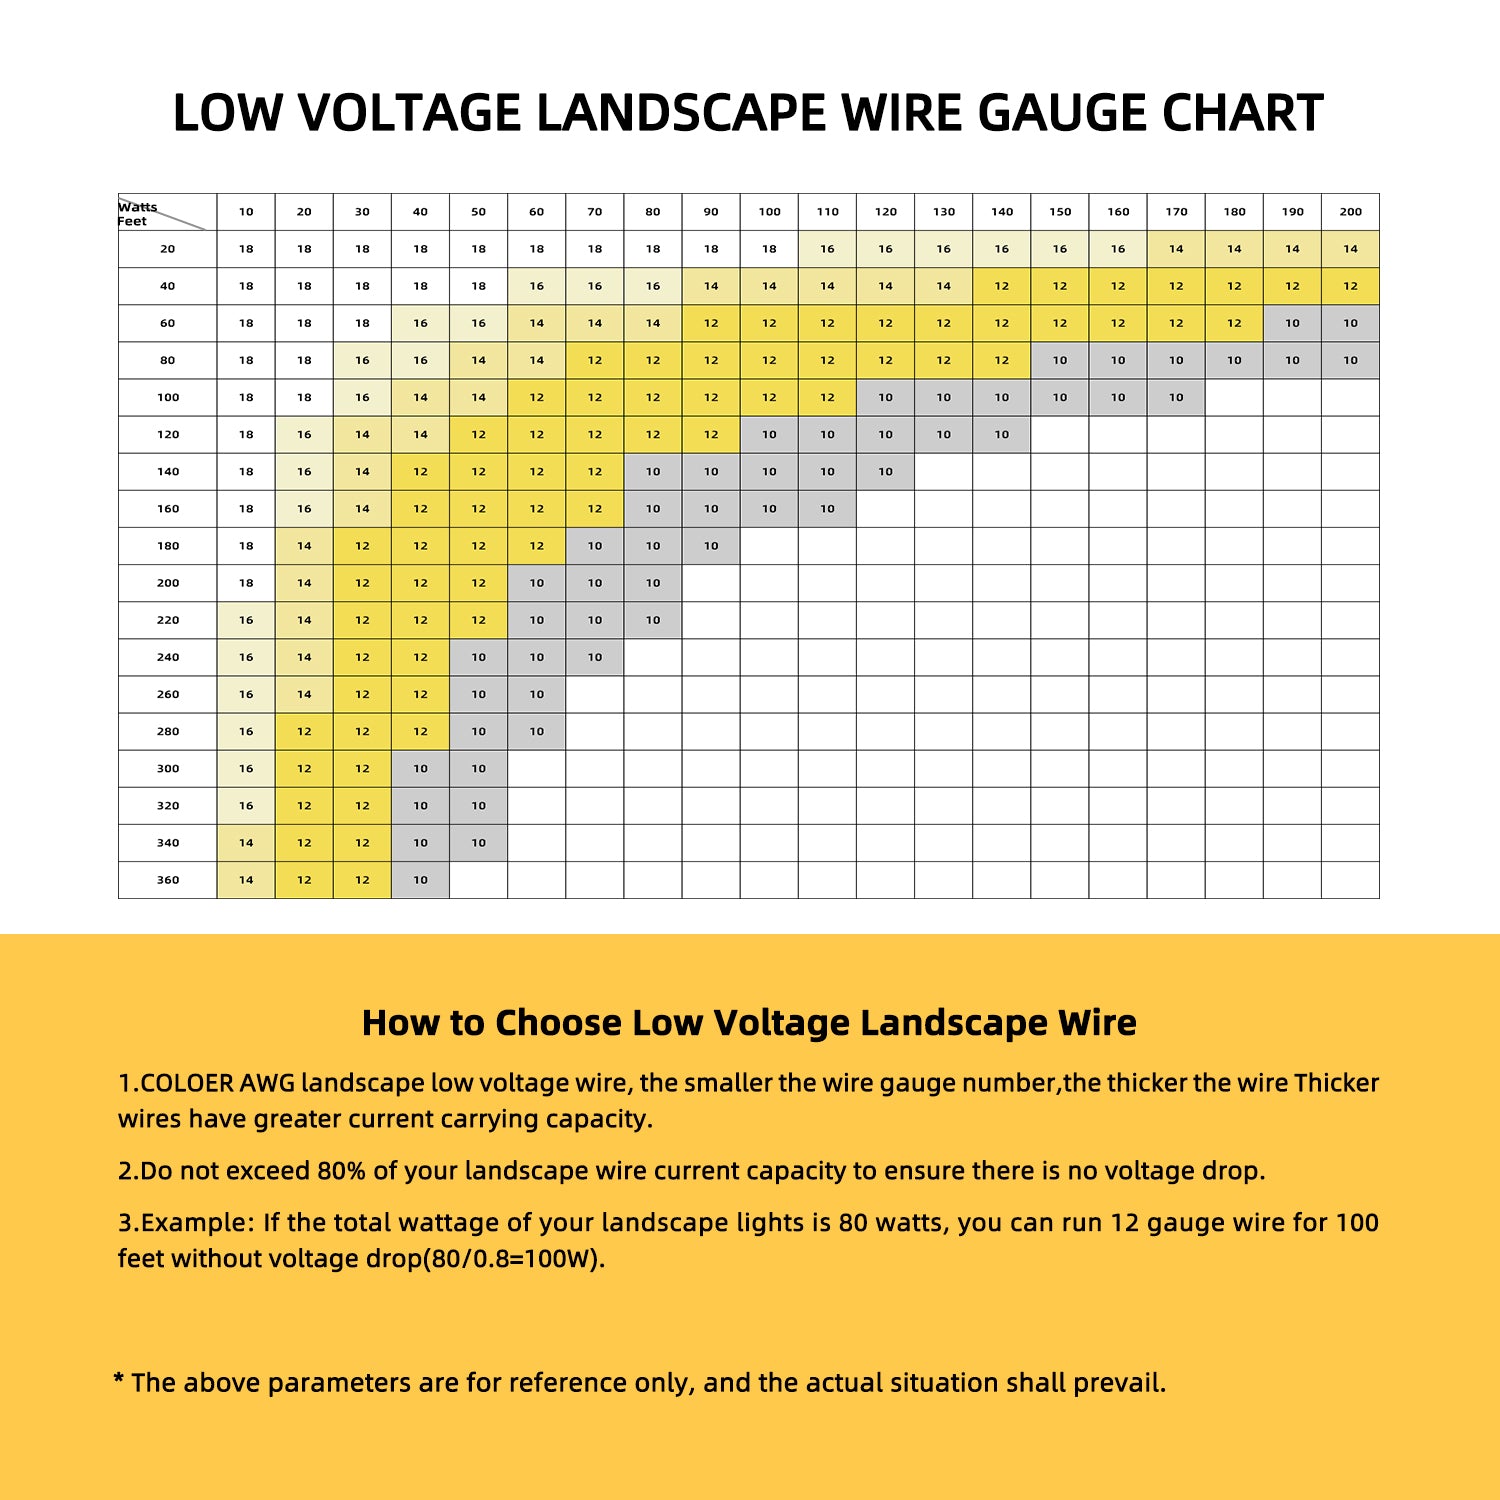 Low Voltage Landscape Wire Gauge Chart for COLOER AWG landscape low voltage wire with guidelines on choosing the appropriate wire gauge based on wattage, current capacity, and avoiding voltage drop.